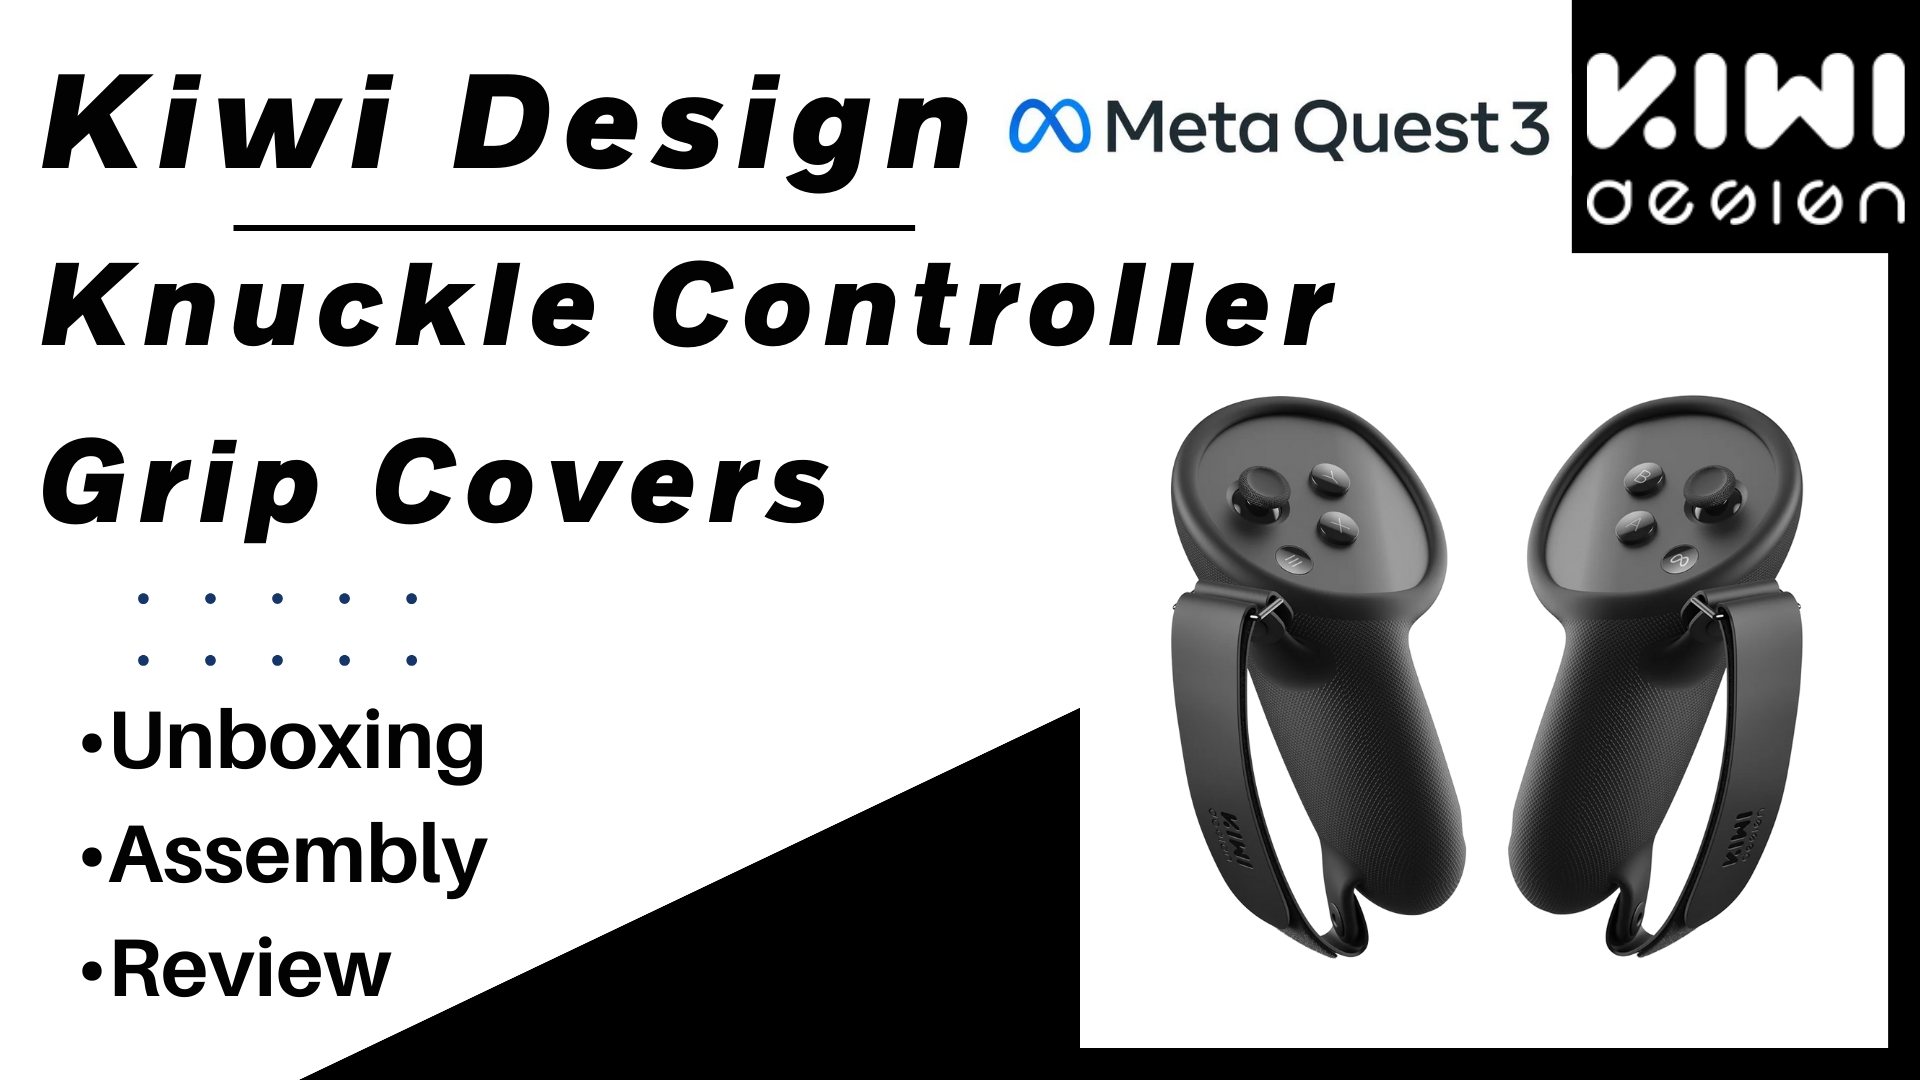 Kiwi Design Knuckle Controller Grip Covers for the Meta Quest 3 - Unboxing,  Assembly, Review - Brian Sloan Artist